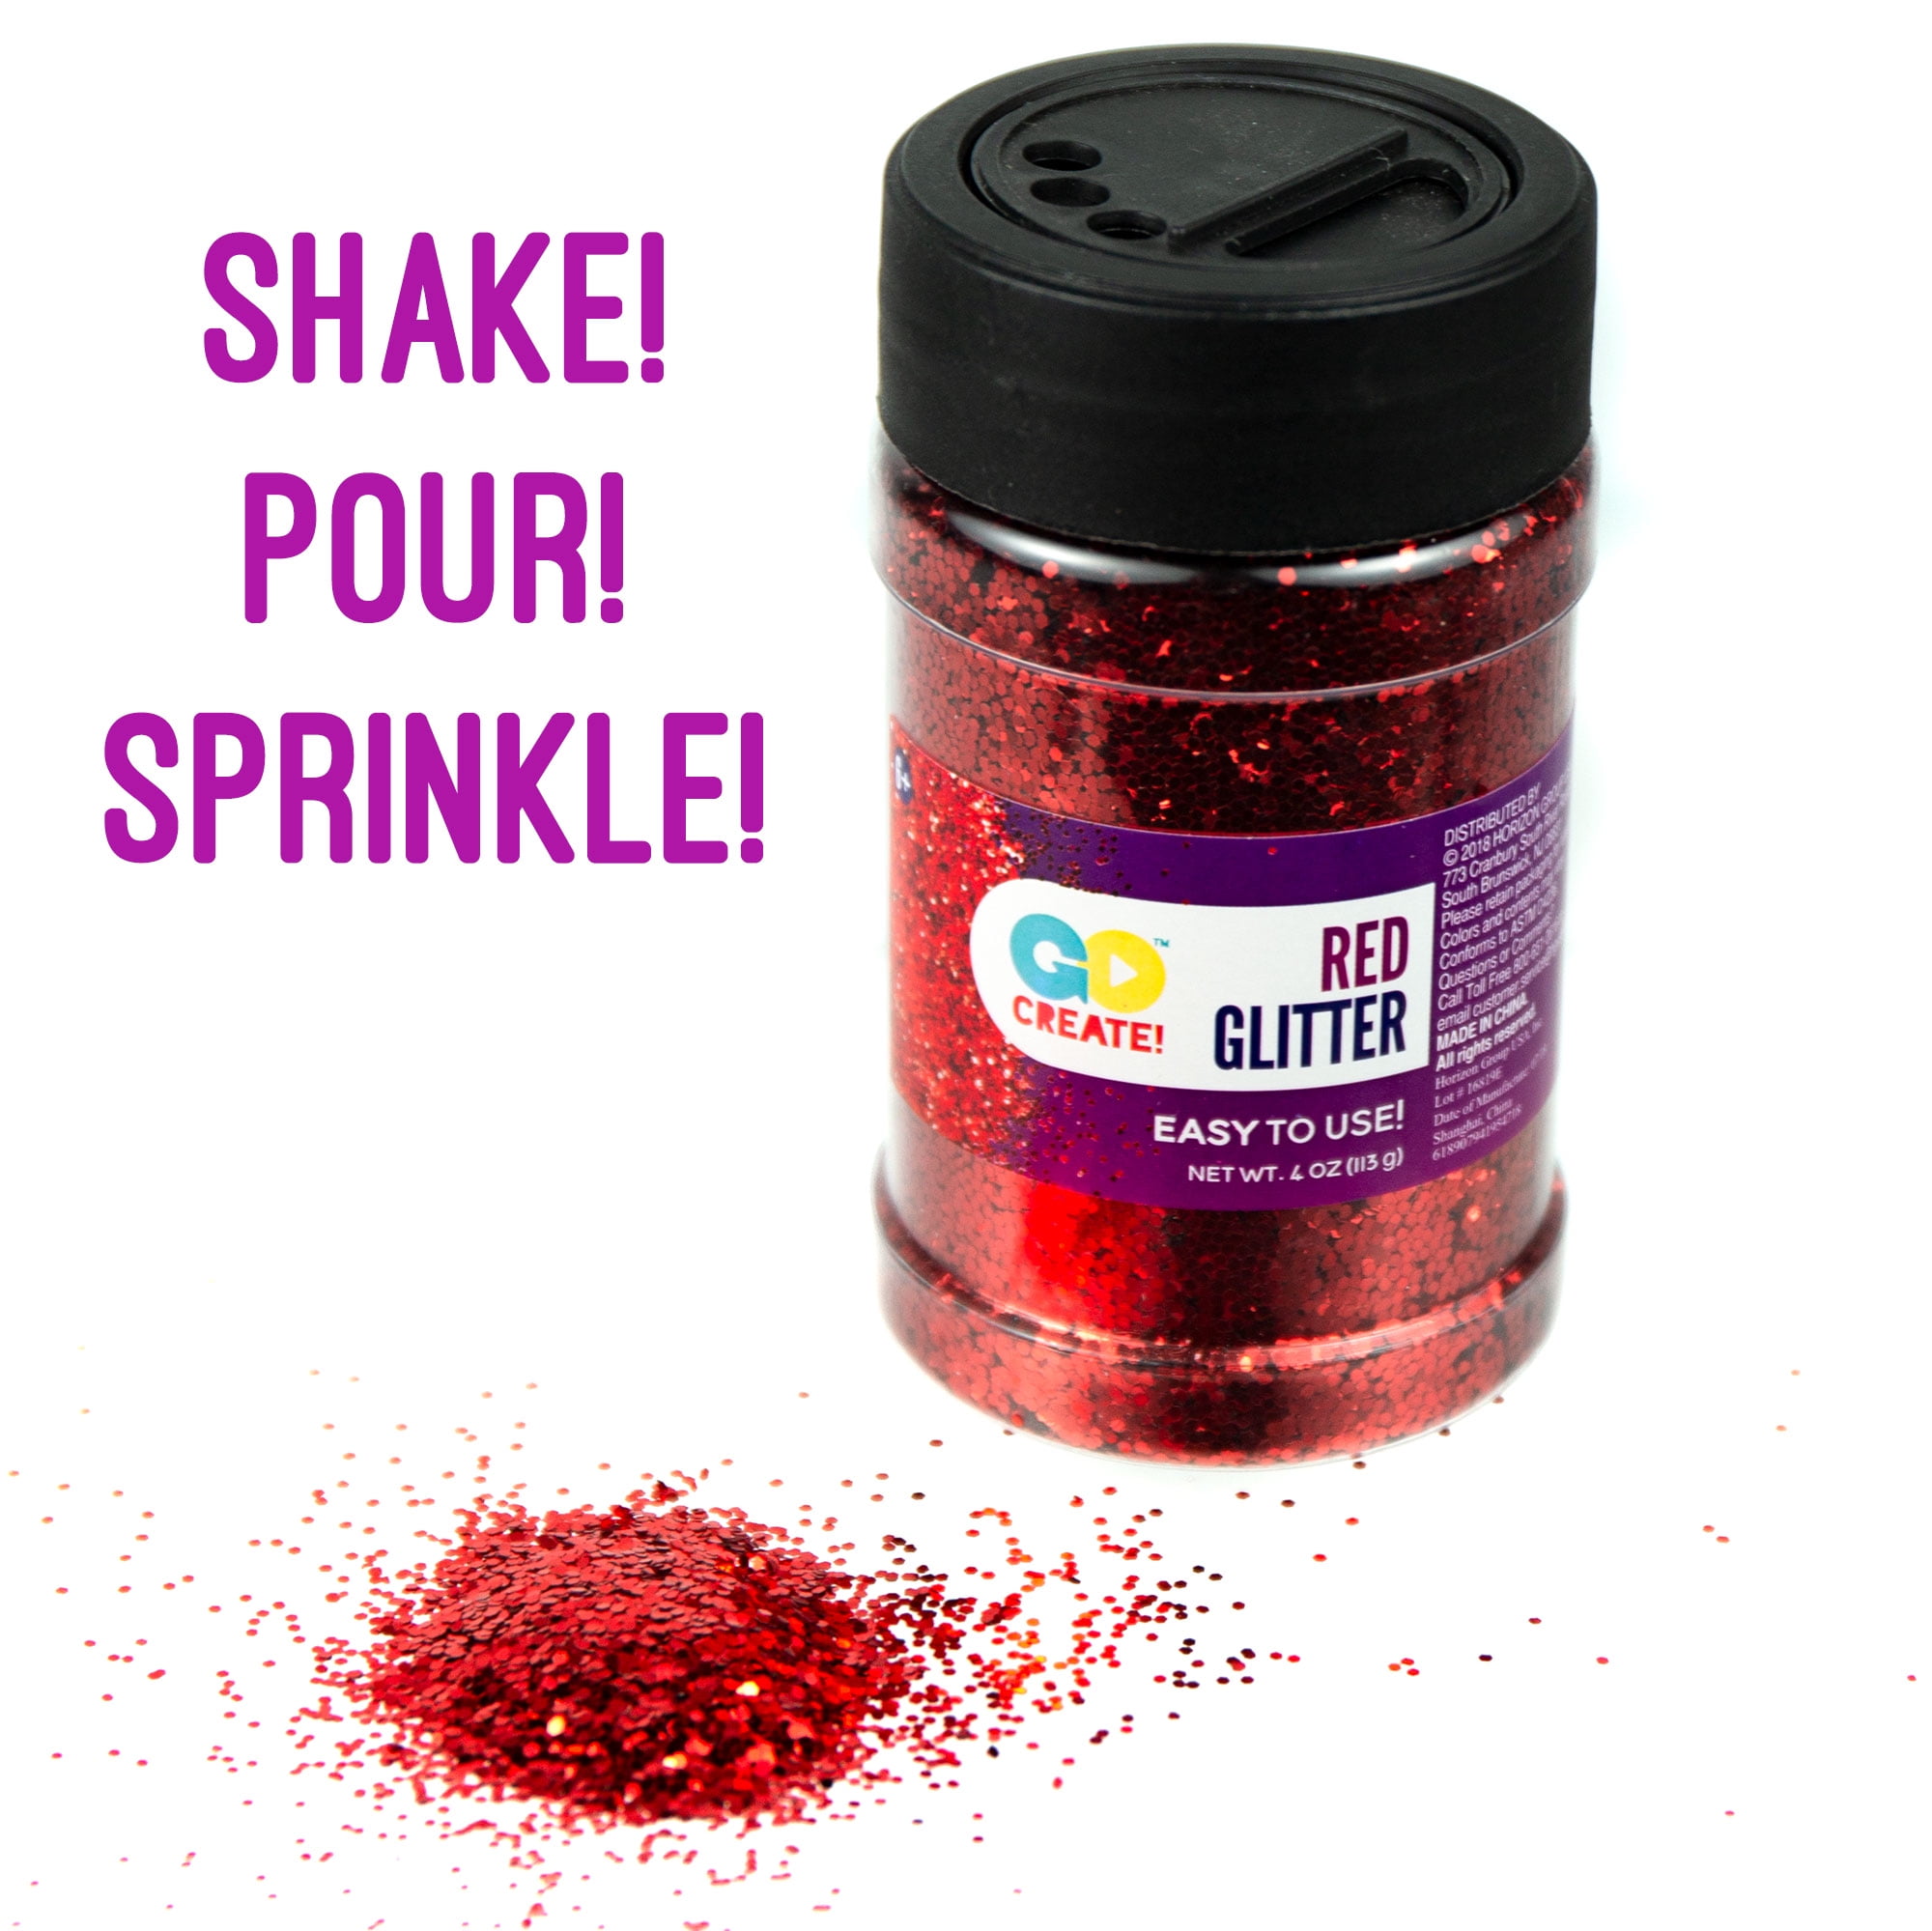 8oz. Round Glitter Shaker with Red Shake and Pour in Lid** Slightly Smaller in Height Than Original